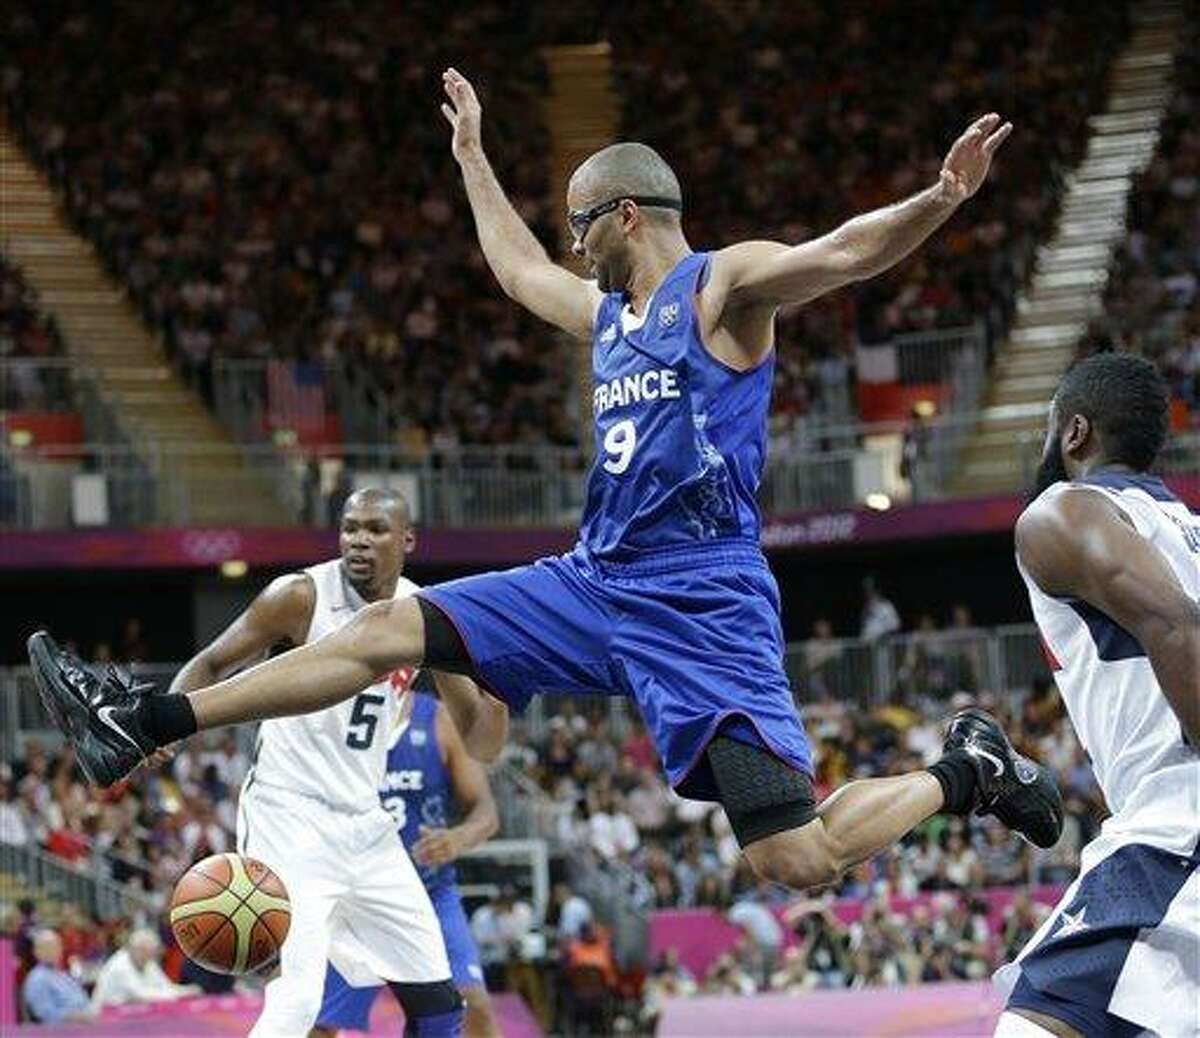 United States' James Harden, right, strips the ball from France's Tony Parker (9) during the first half of a preliminary men's basketball game at the 2012 Summer Olympics Sunday in London. Associated Press